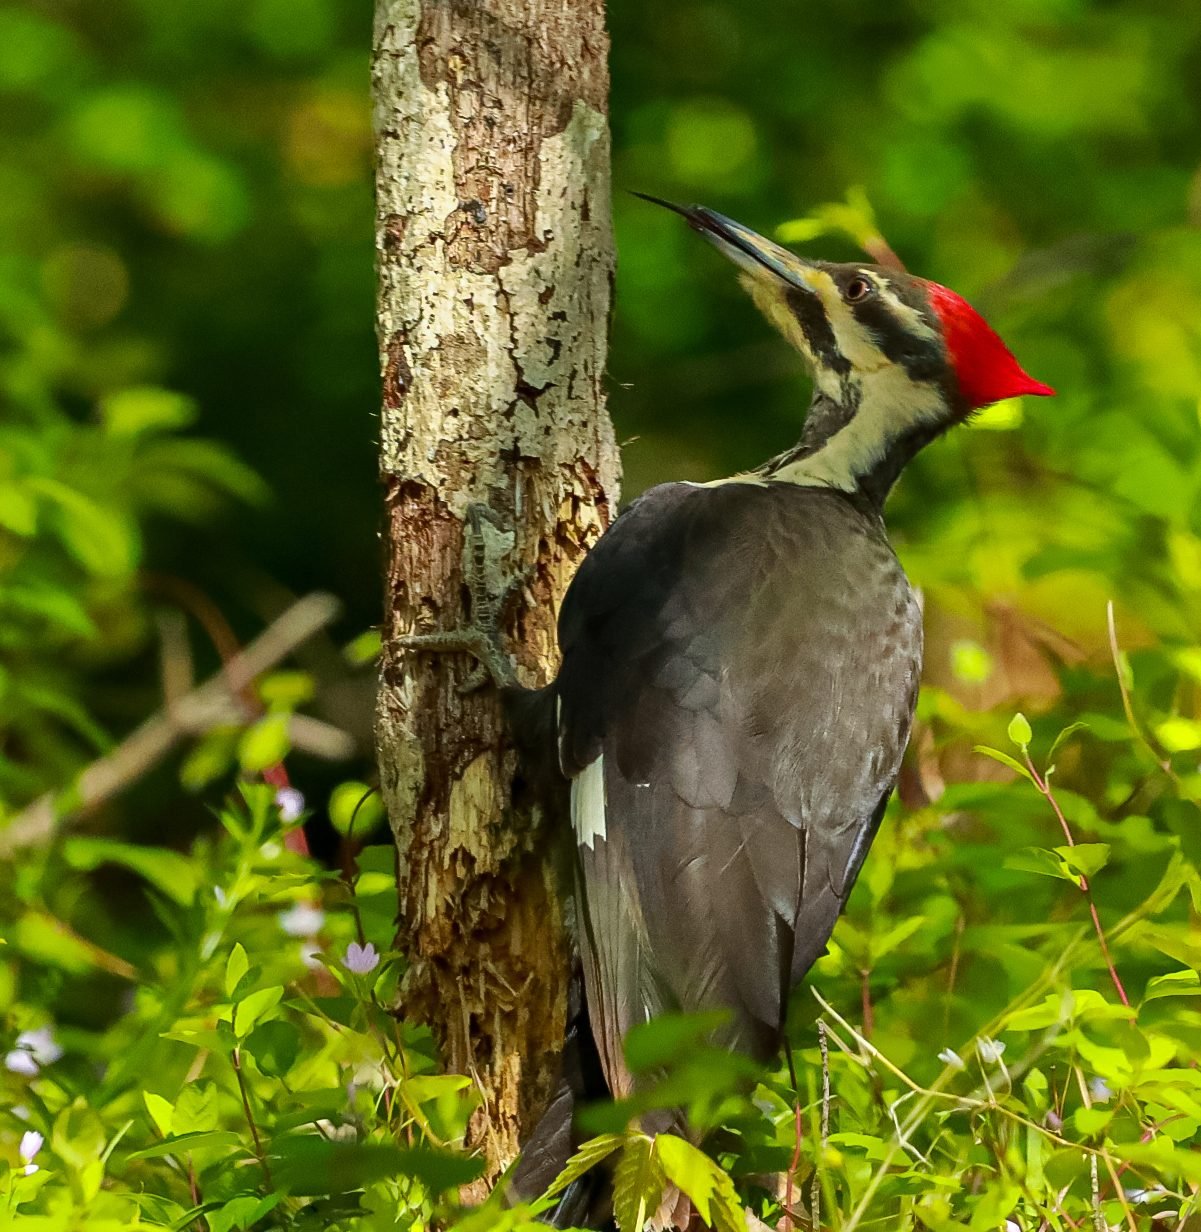 How Do Woodpeckers Use Their Tongues and Beaks?